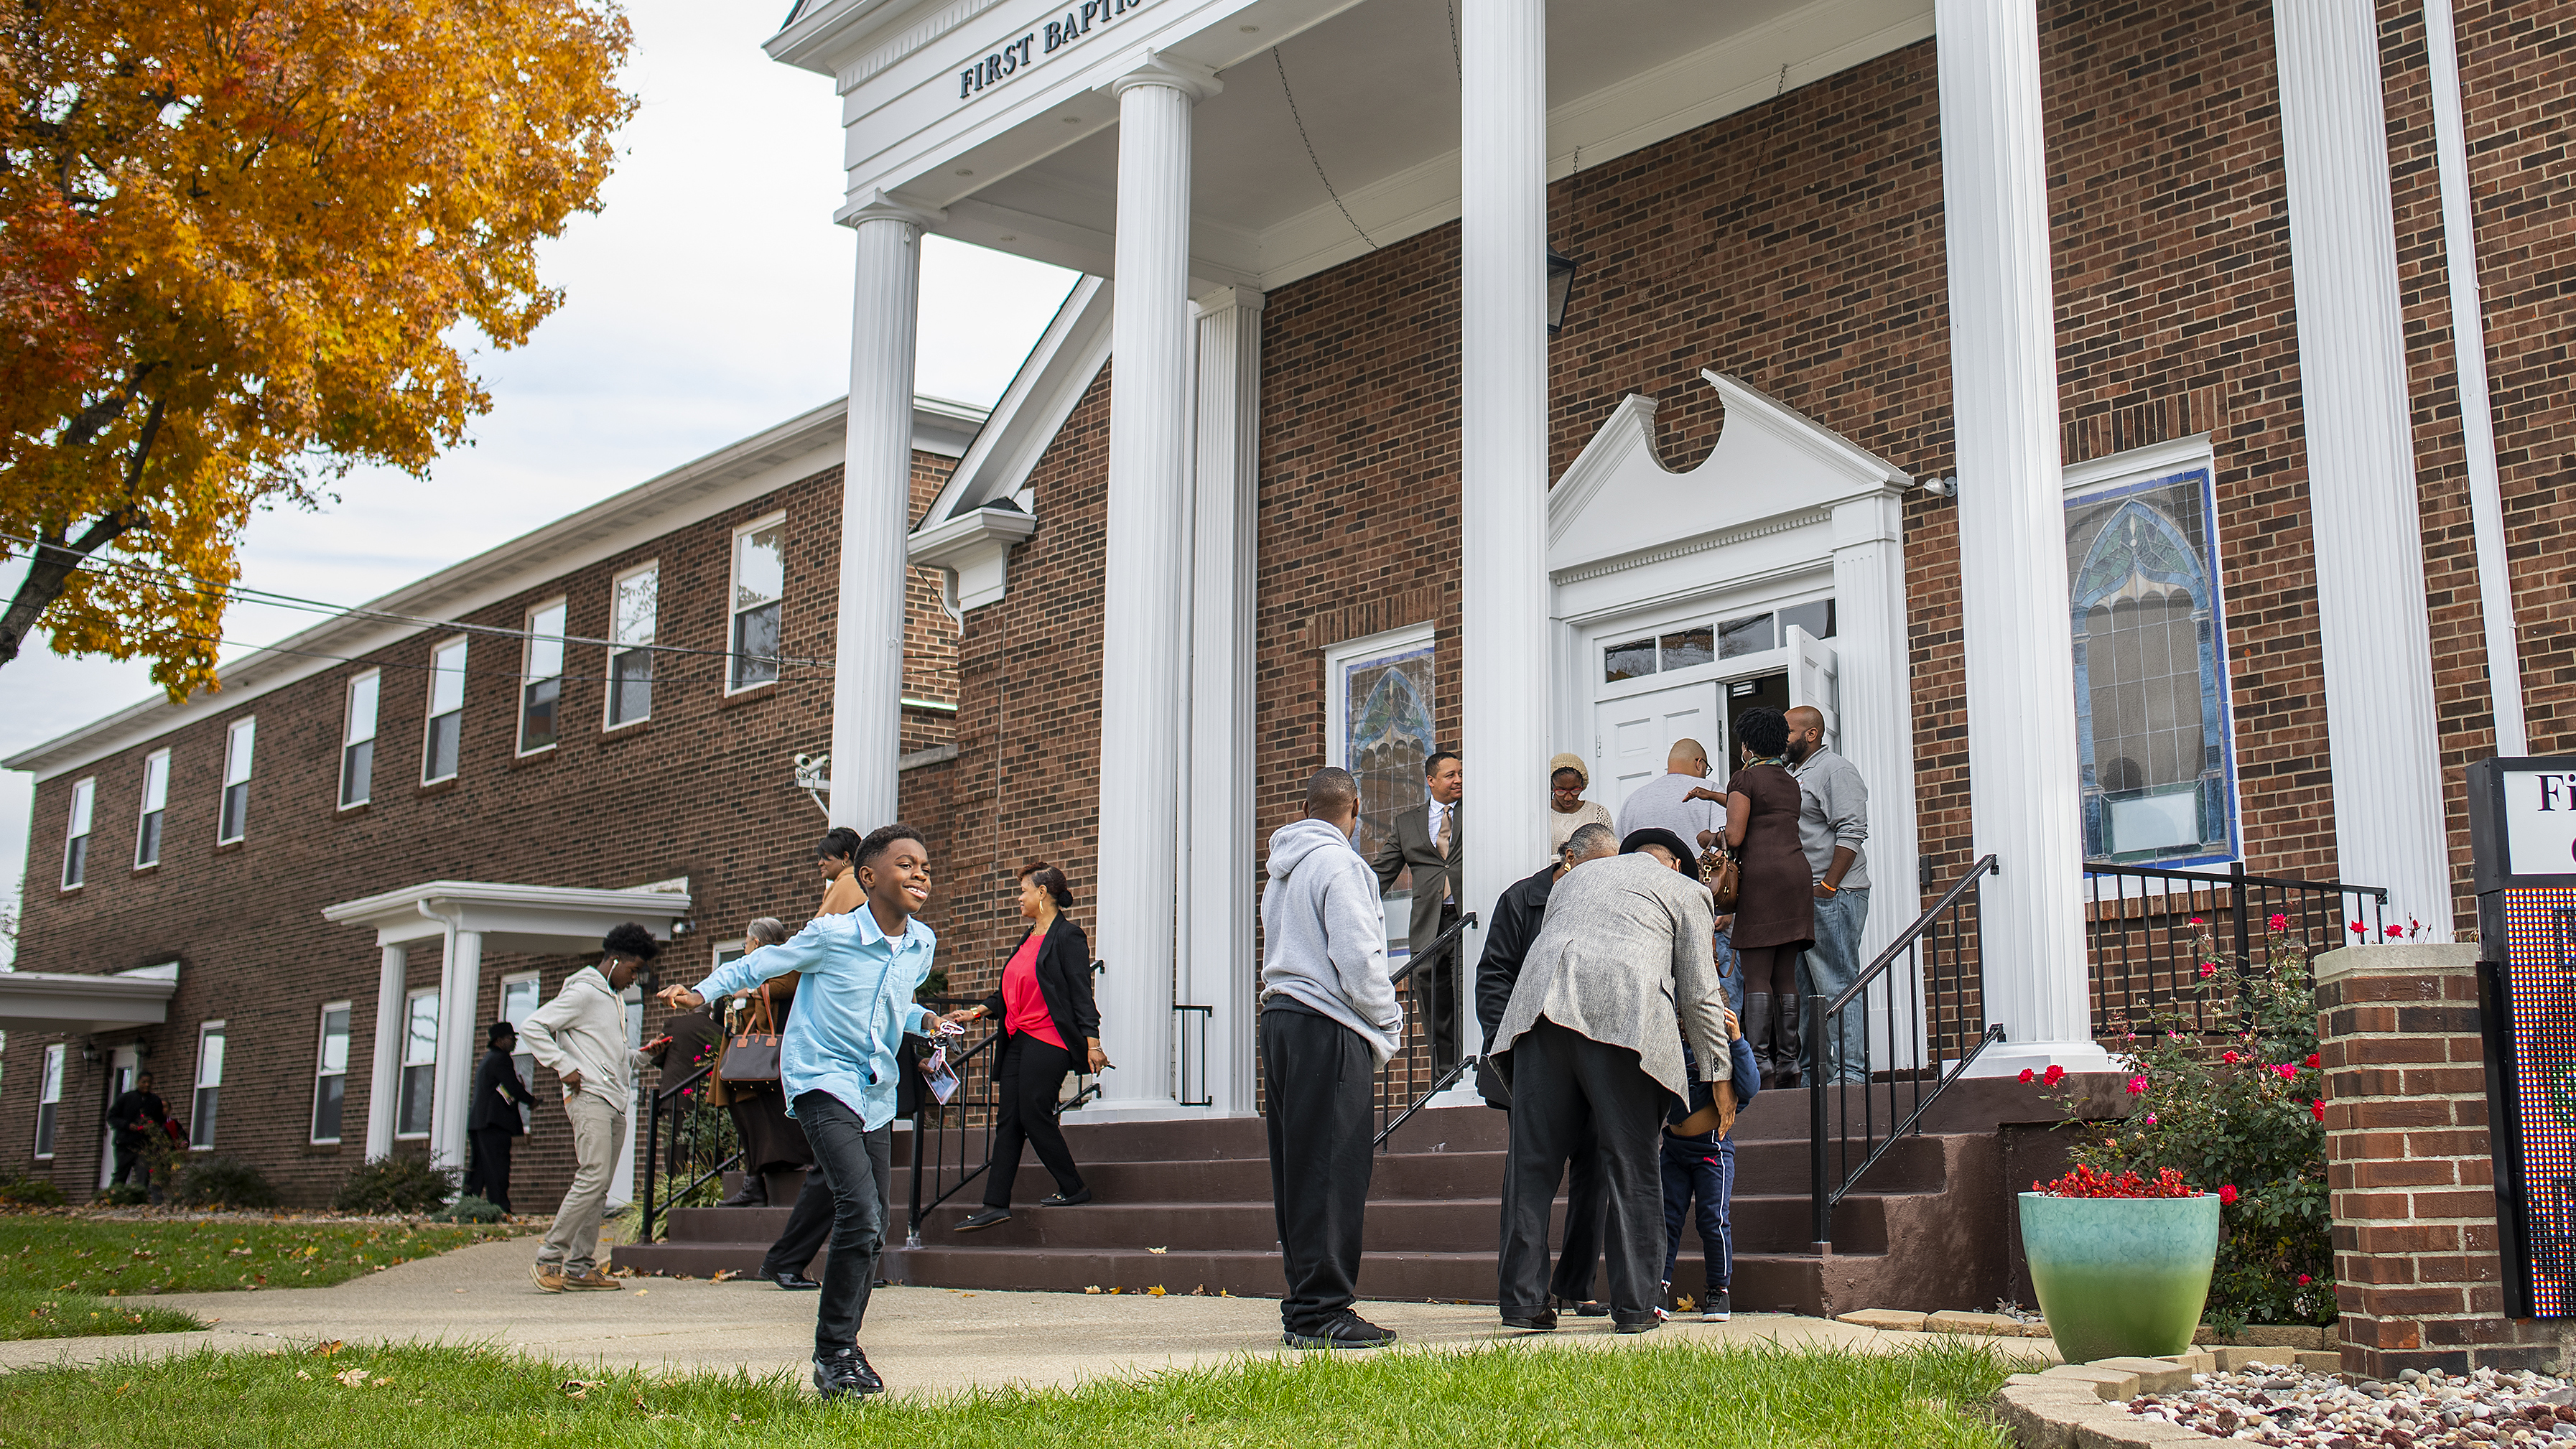 77% of Black Americans say Black churches have helped promote